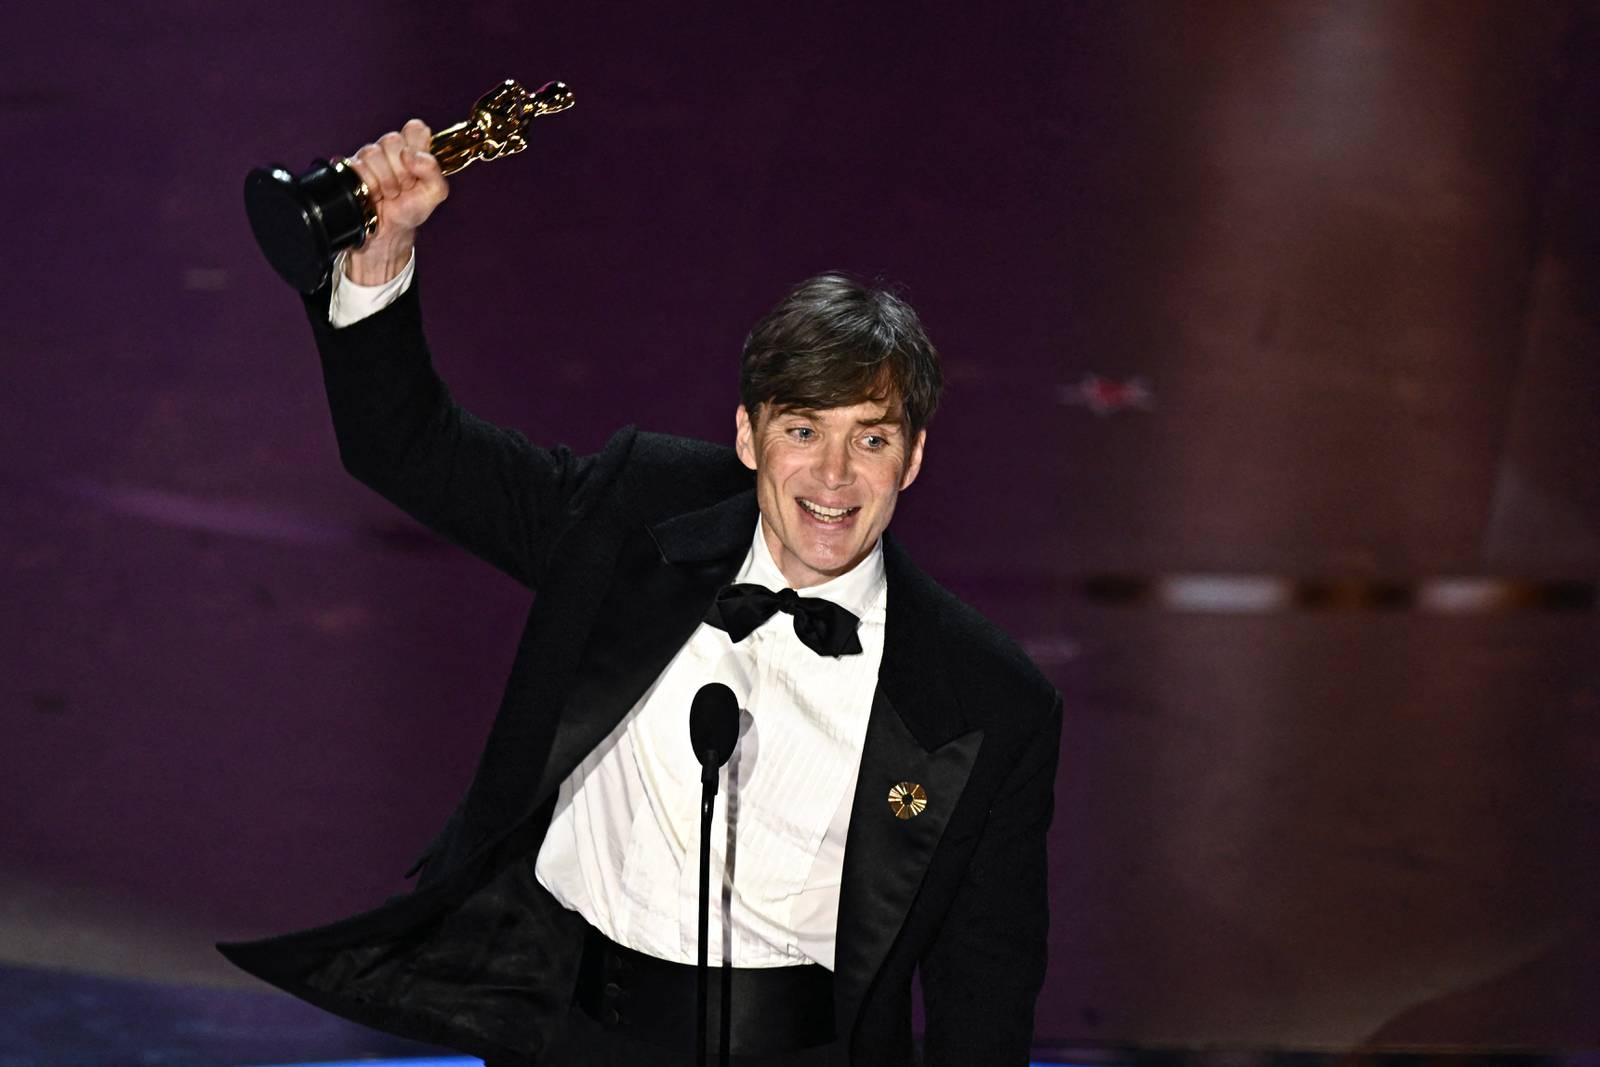 TOPSHOT - Irish actor Cillian Murphy accepts the award for Best Actor in a Leading Role for "Oppenheimer" onstage during the 96th Annual Academy Awards at the Dolby Theatre in Hollywood, California on March 10, 2024. (Photo by Patrick T. Fallon / AFP) (Photo by PATRICK T. FALLON/AFP via Getty Images)